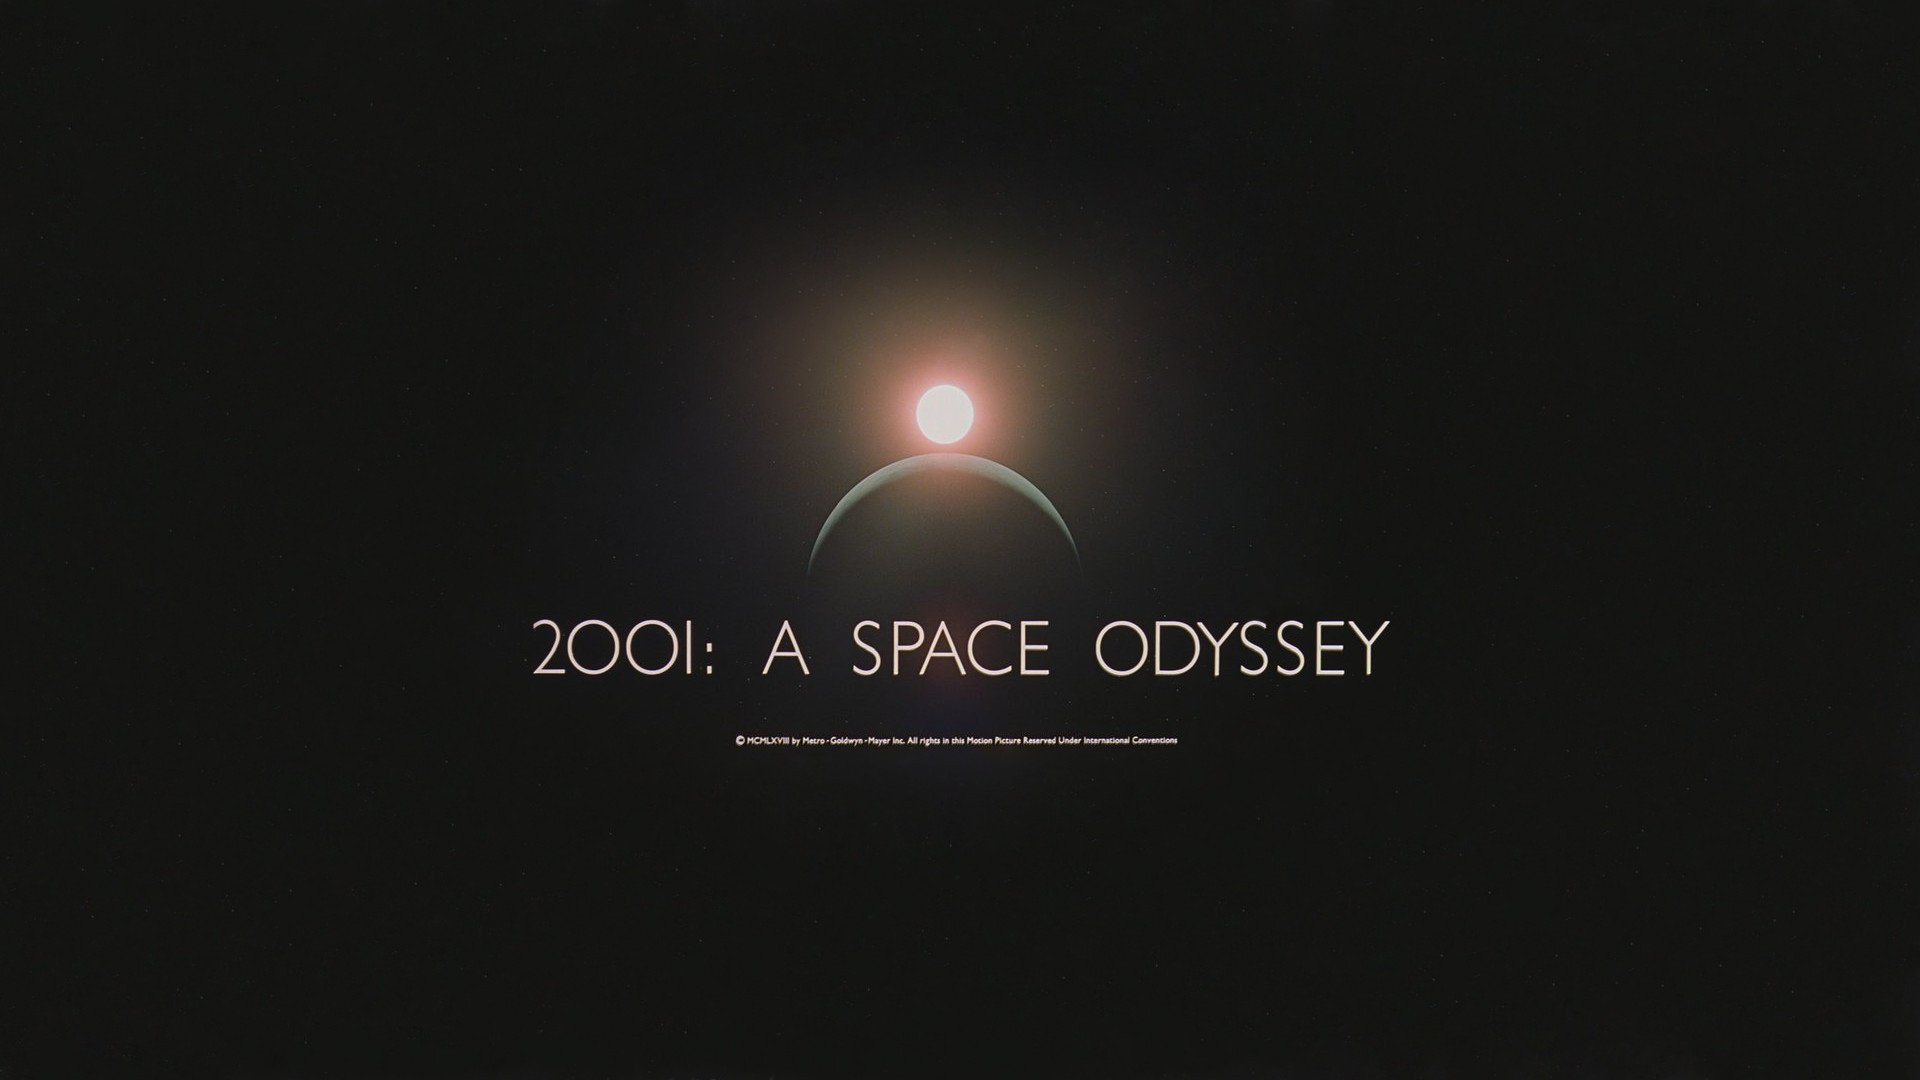 High resolution 2001: A Space Odyssey full hd 1920x1080 background ID:17774 for PC